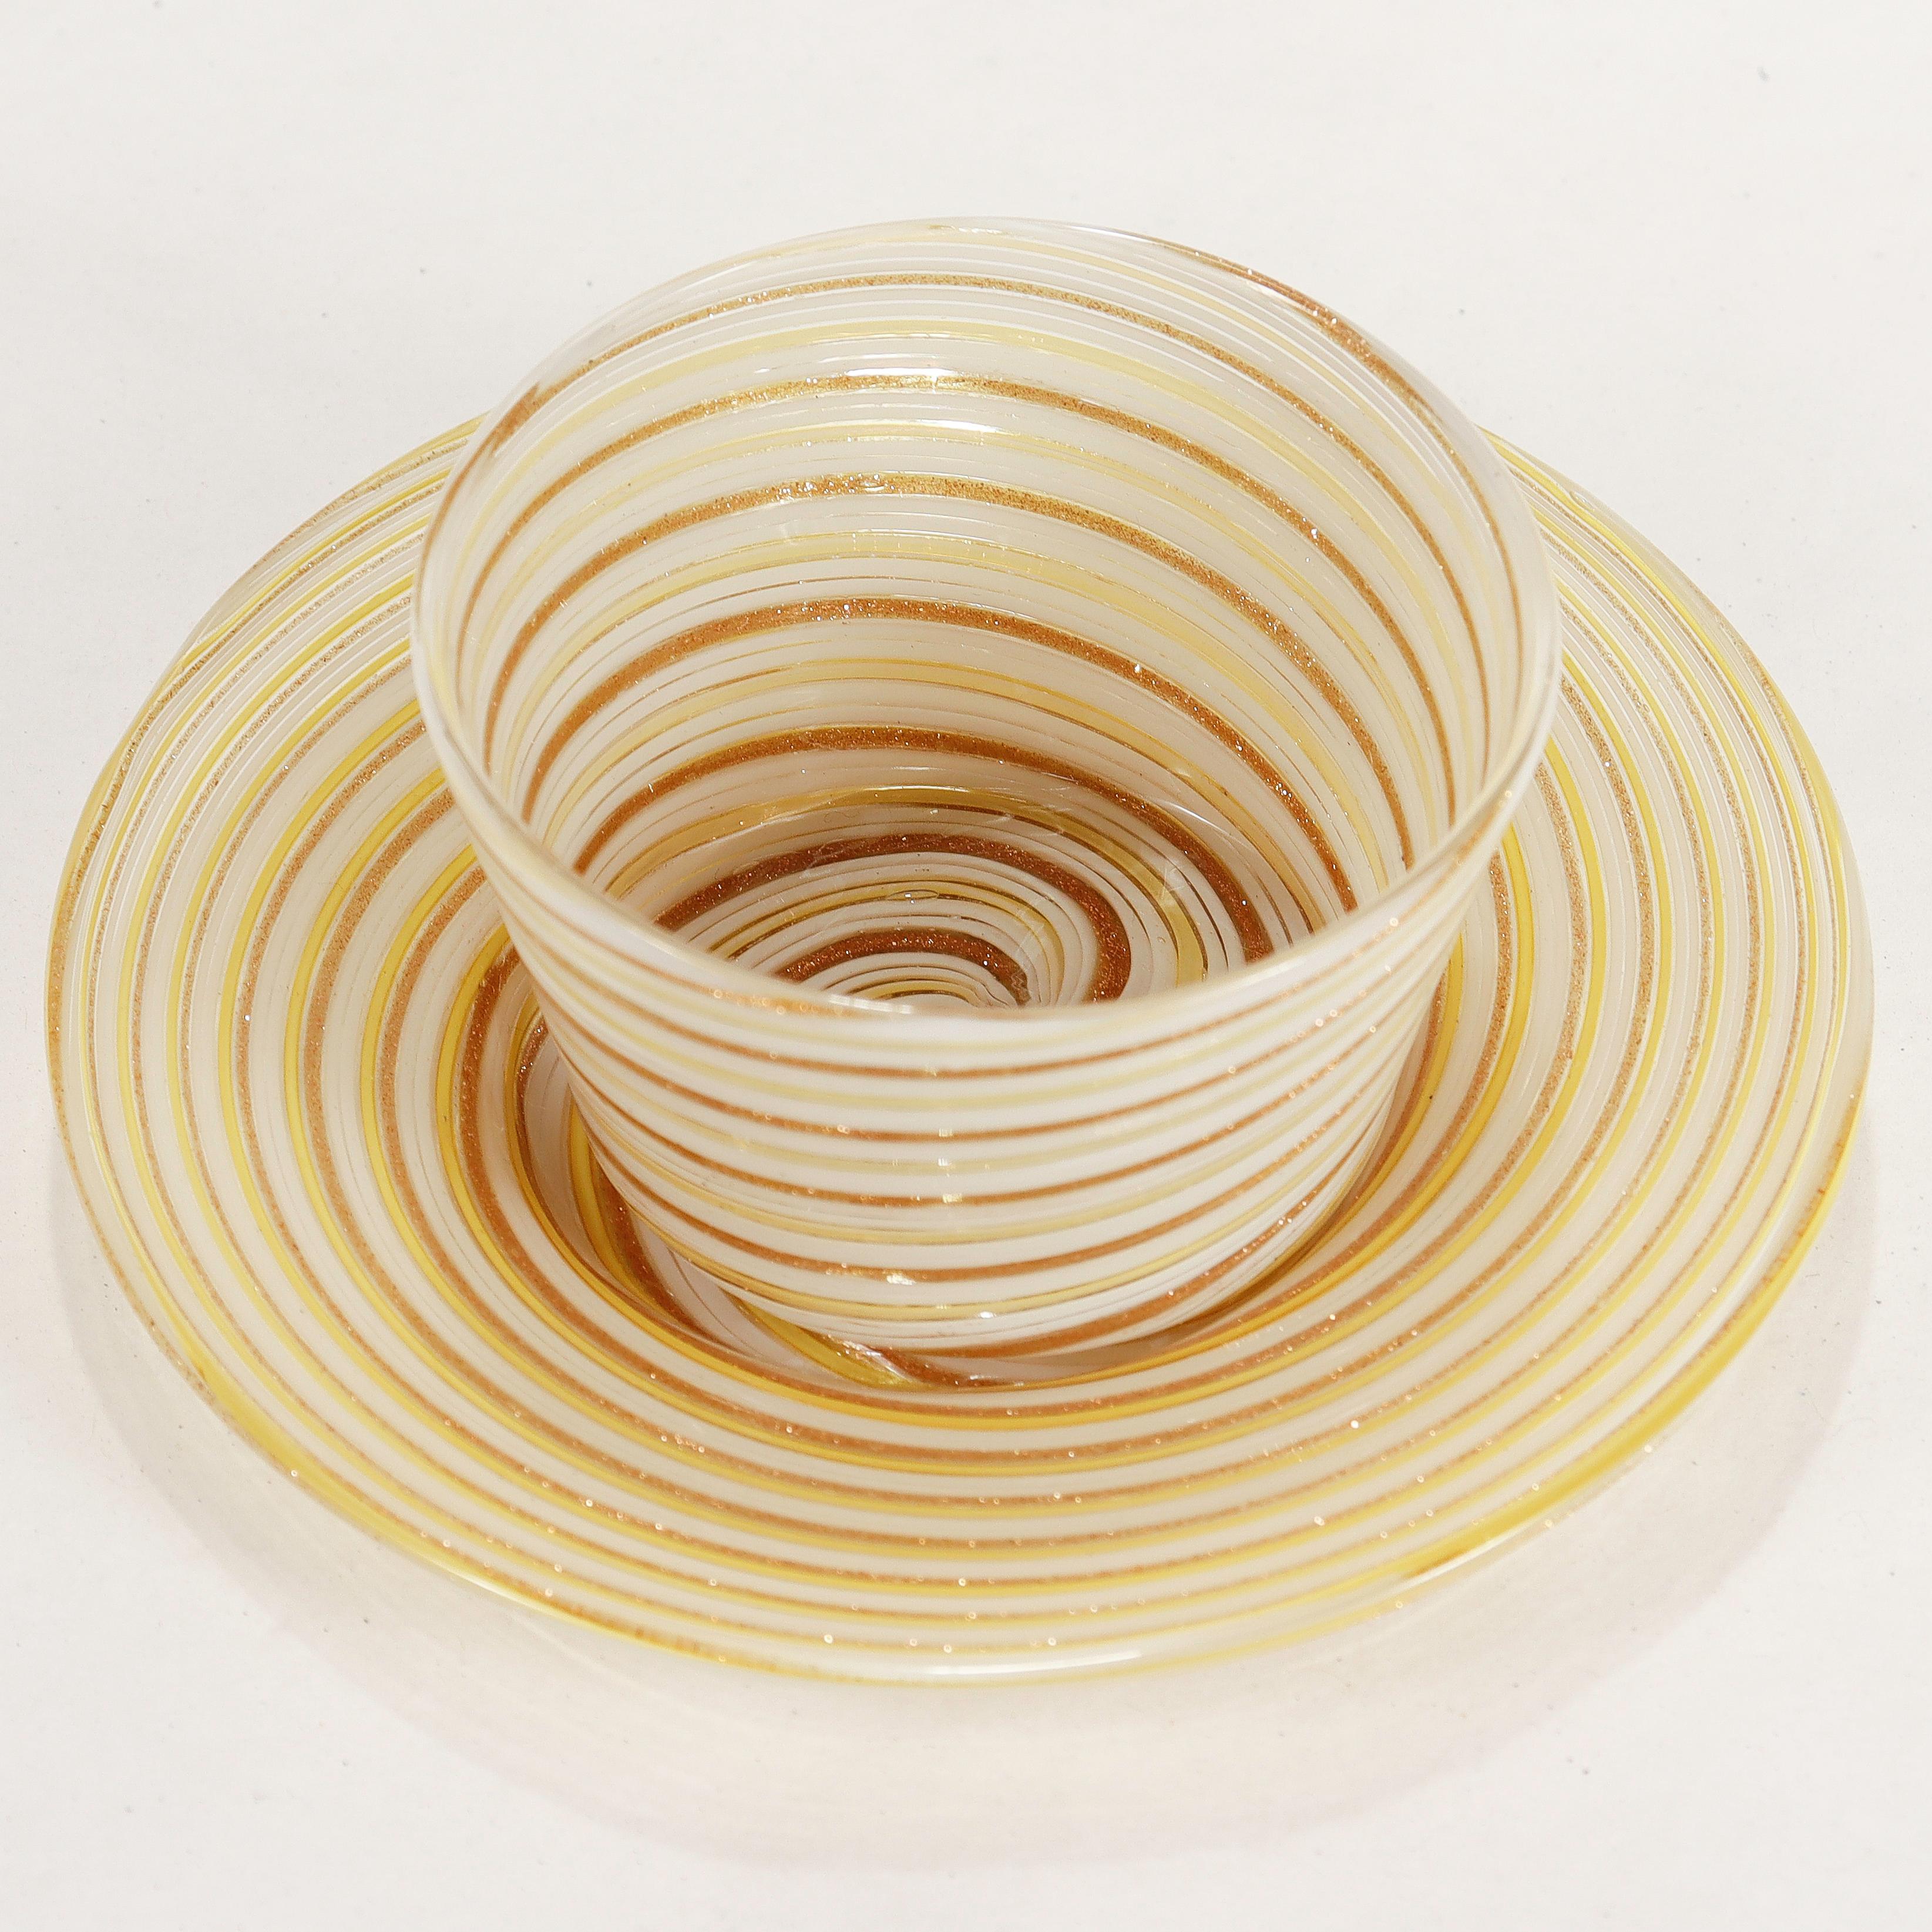 A fine vintage Italian glass finger bowl or handleless cup & saucer.

Attributed to Salviati.

Comprised of Mezza filigrana canes with white, yellow, and aventurine threads.

Simply a wonderful Venetian glass example!

Date:
Early 20th